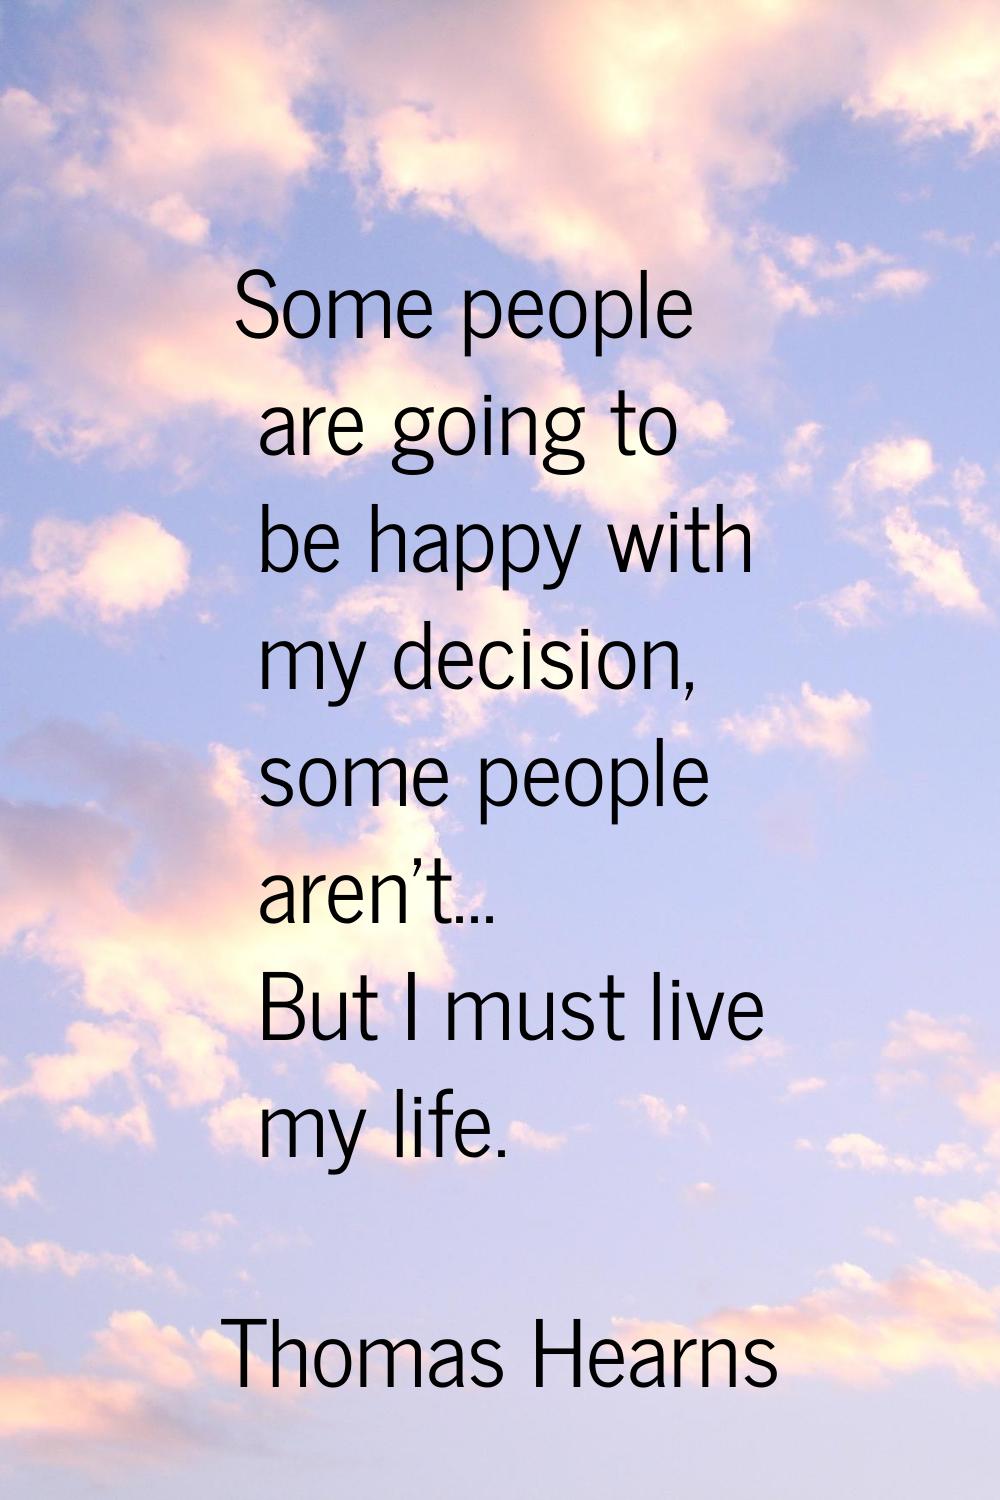 Some people are going to be happy with my decision, some people aren't... But I must live my life.